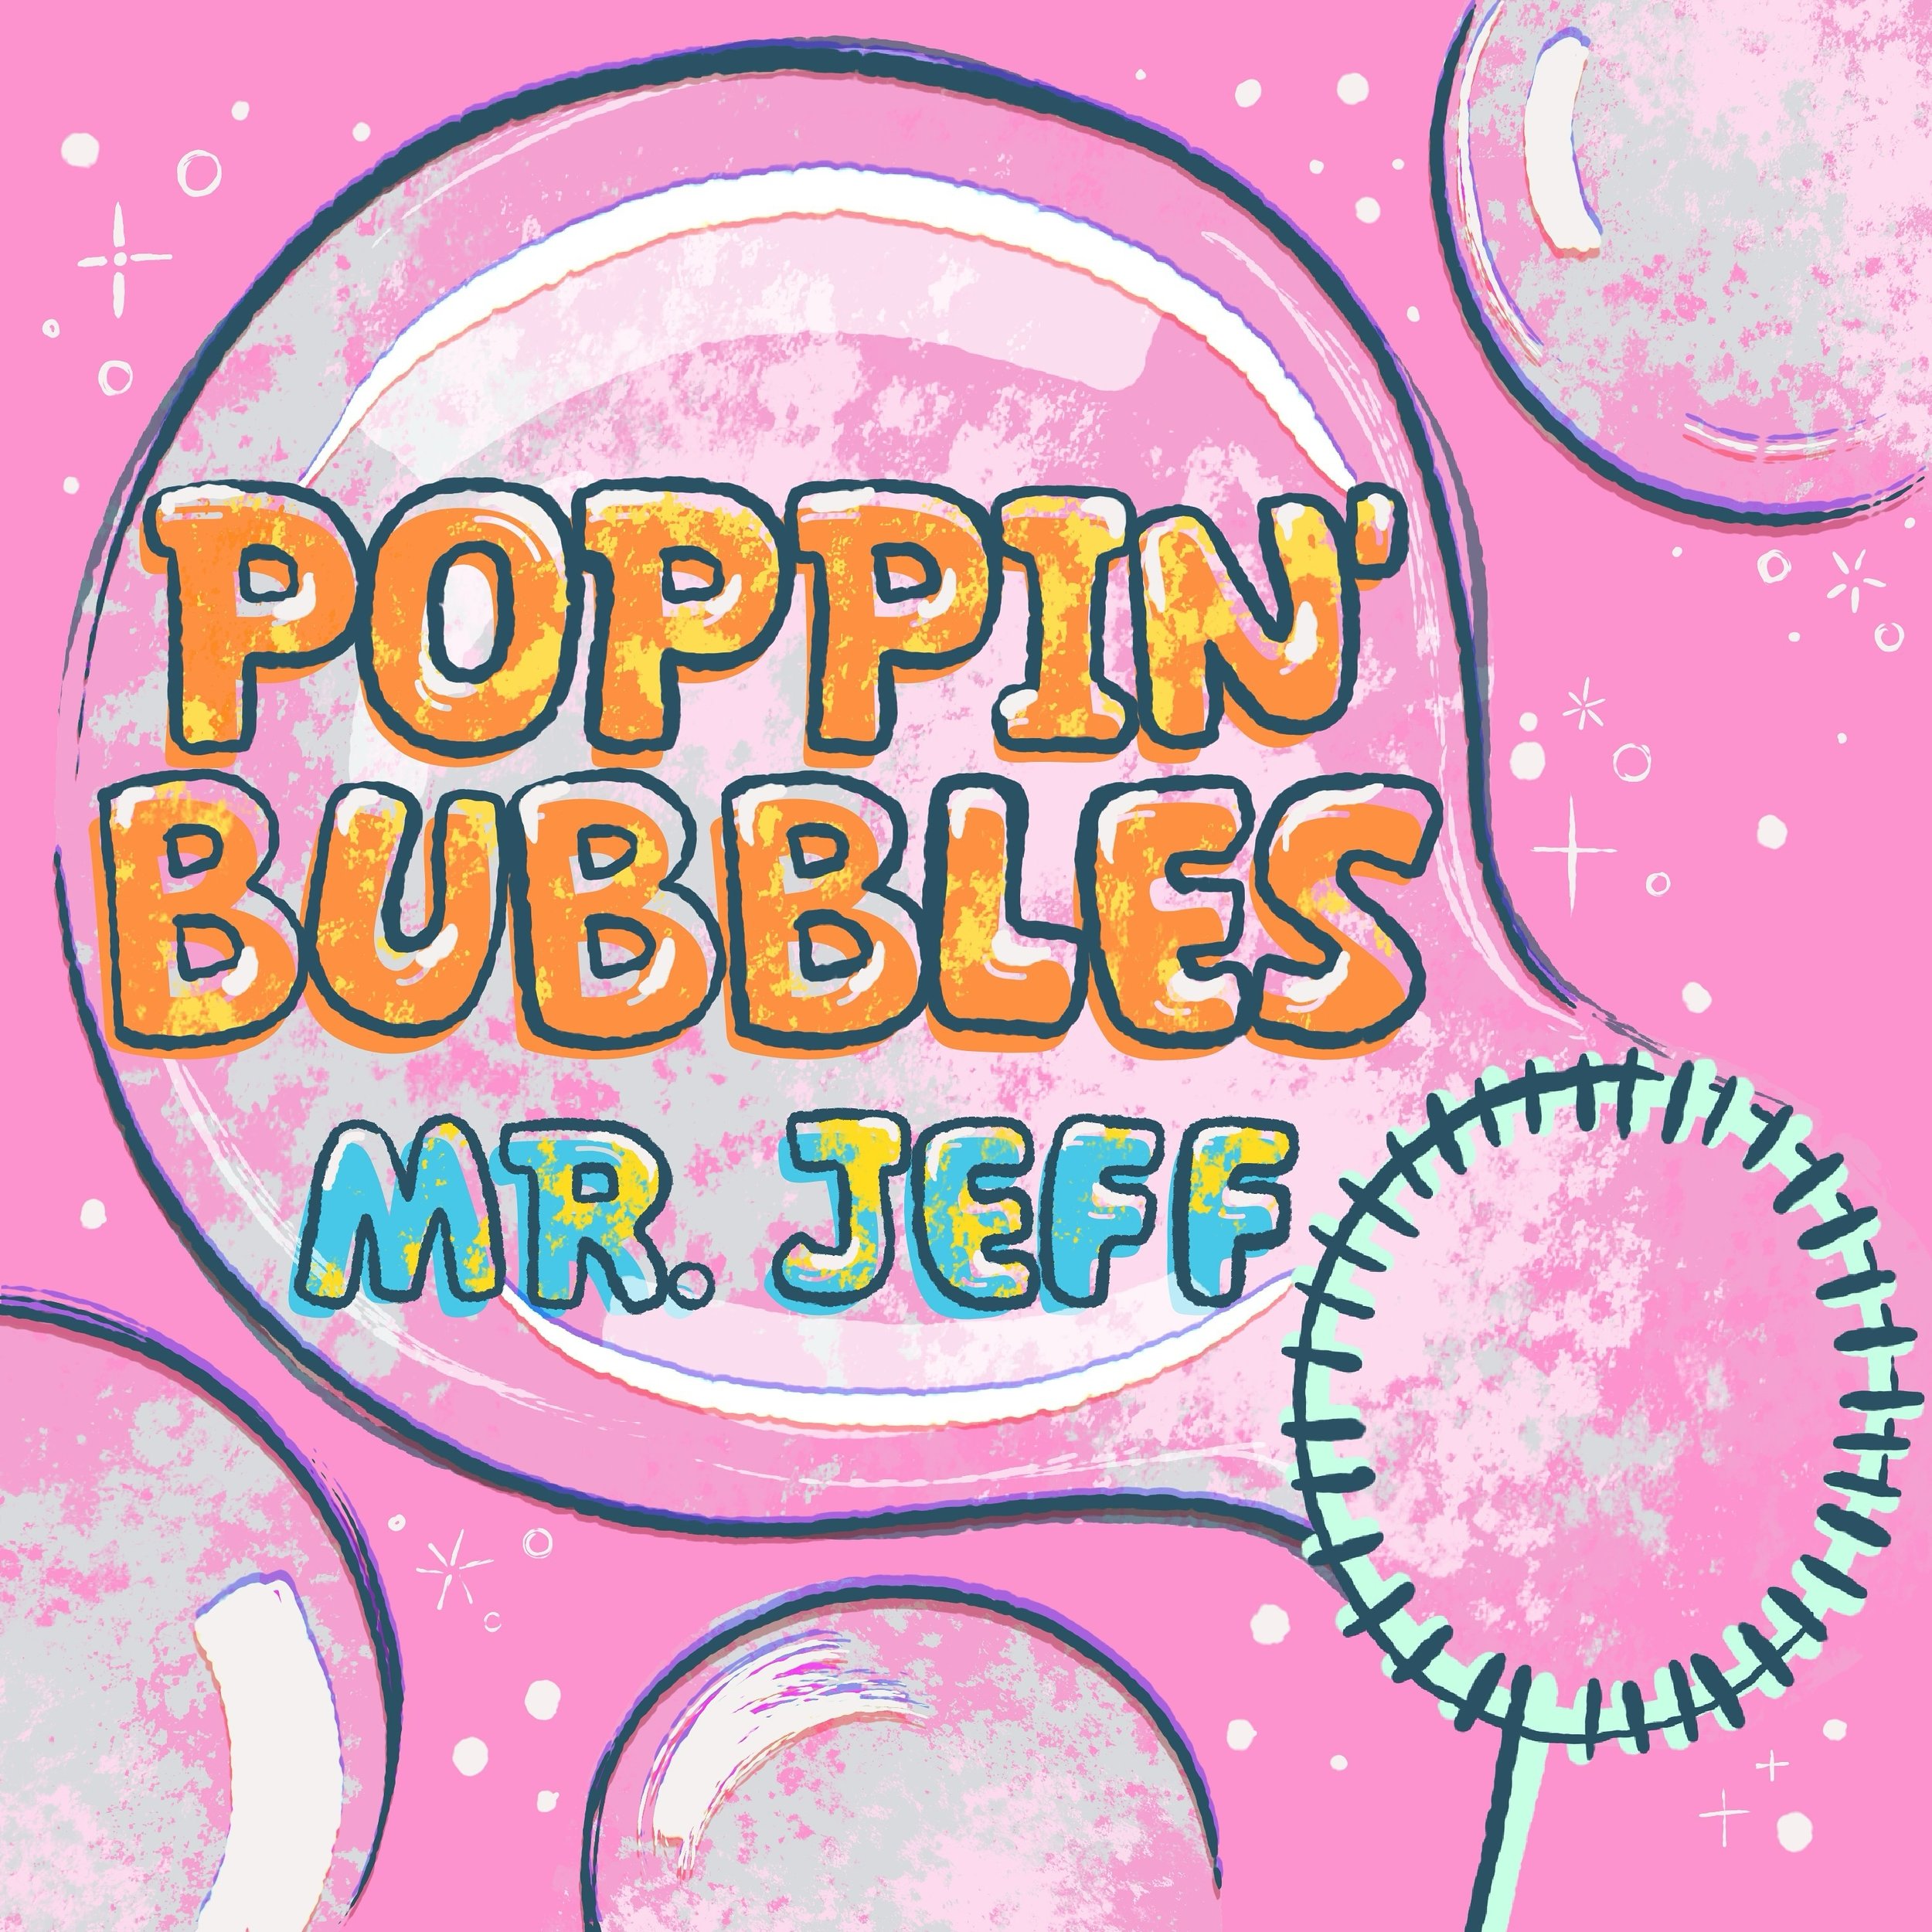 🫧🫧The next single and video &ldquo;Poppin&rsquo; Bubbles&rdquo; comes out in ONE WEEK 🫧🫧 whoa oh oh!! 🫧🫧 Art by @jillyjellyart 🫧🫧 .
.
.
.
#childrensmusic #kidsmusic #musicforkids #kindie #kindiemusic #mrjeffisfun #KidsMusic #ChildrensMusic #F